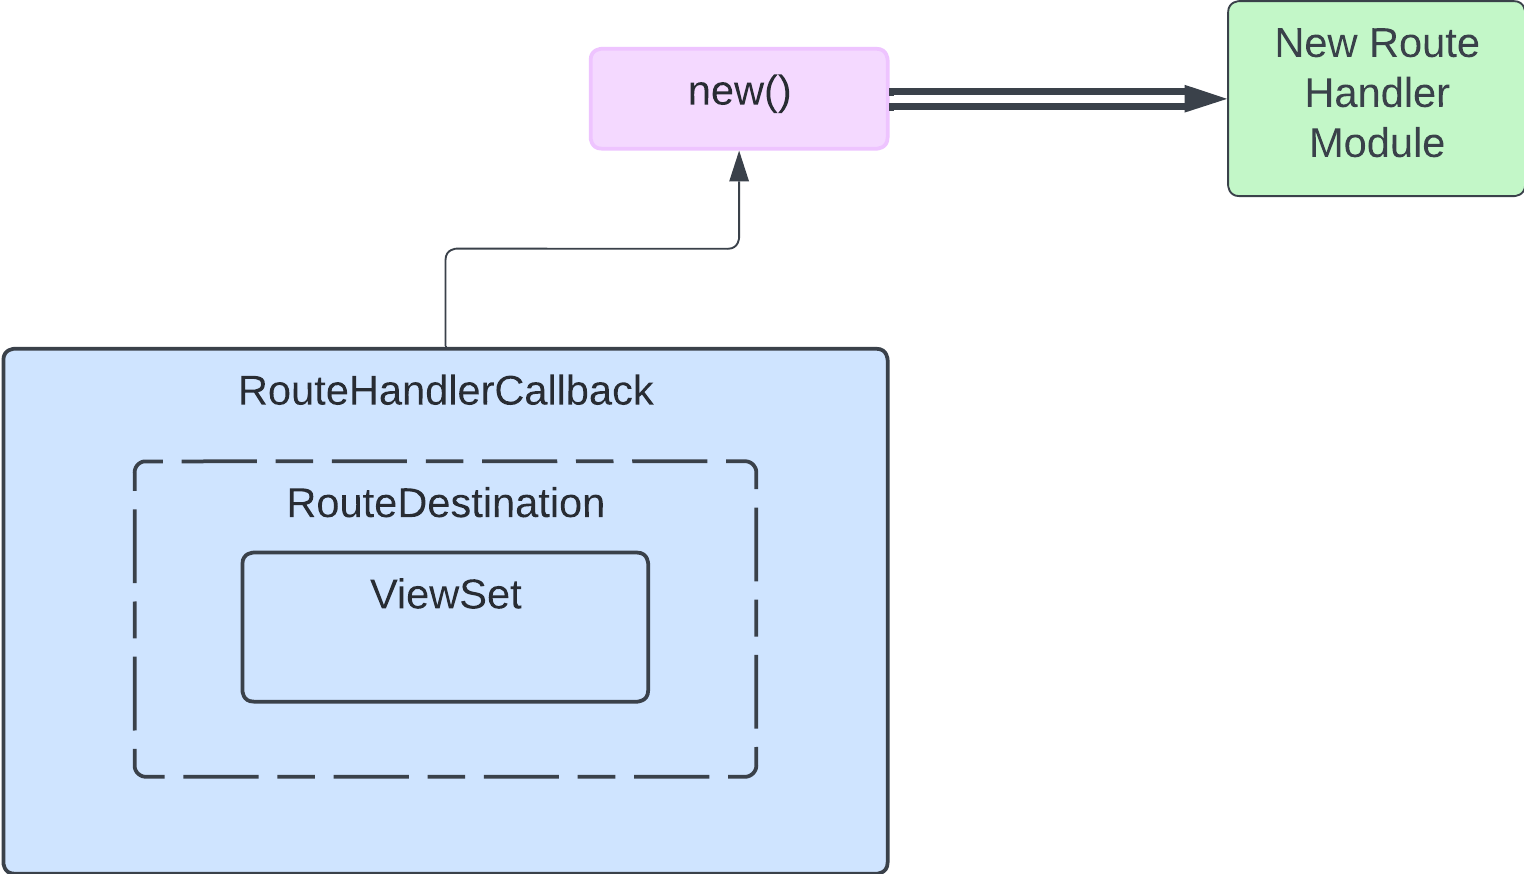 Diagram showing input and output for new().